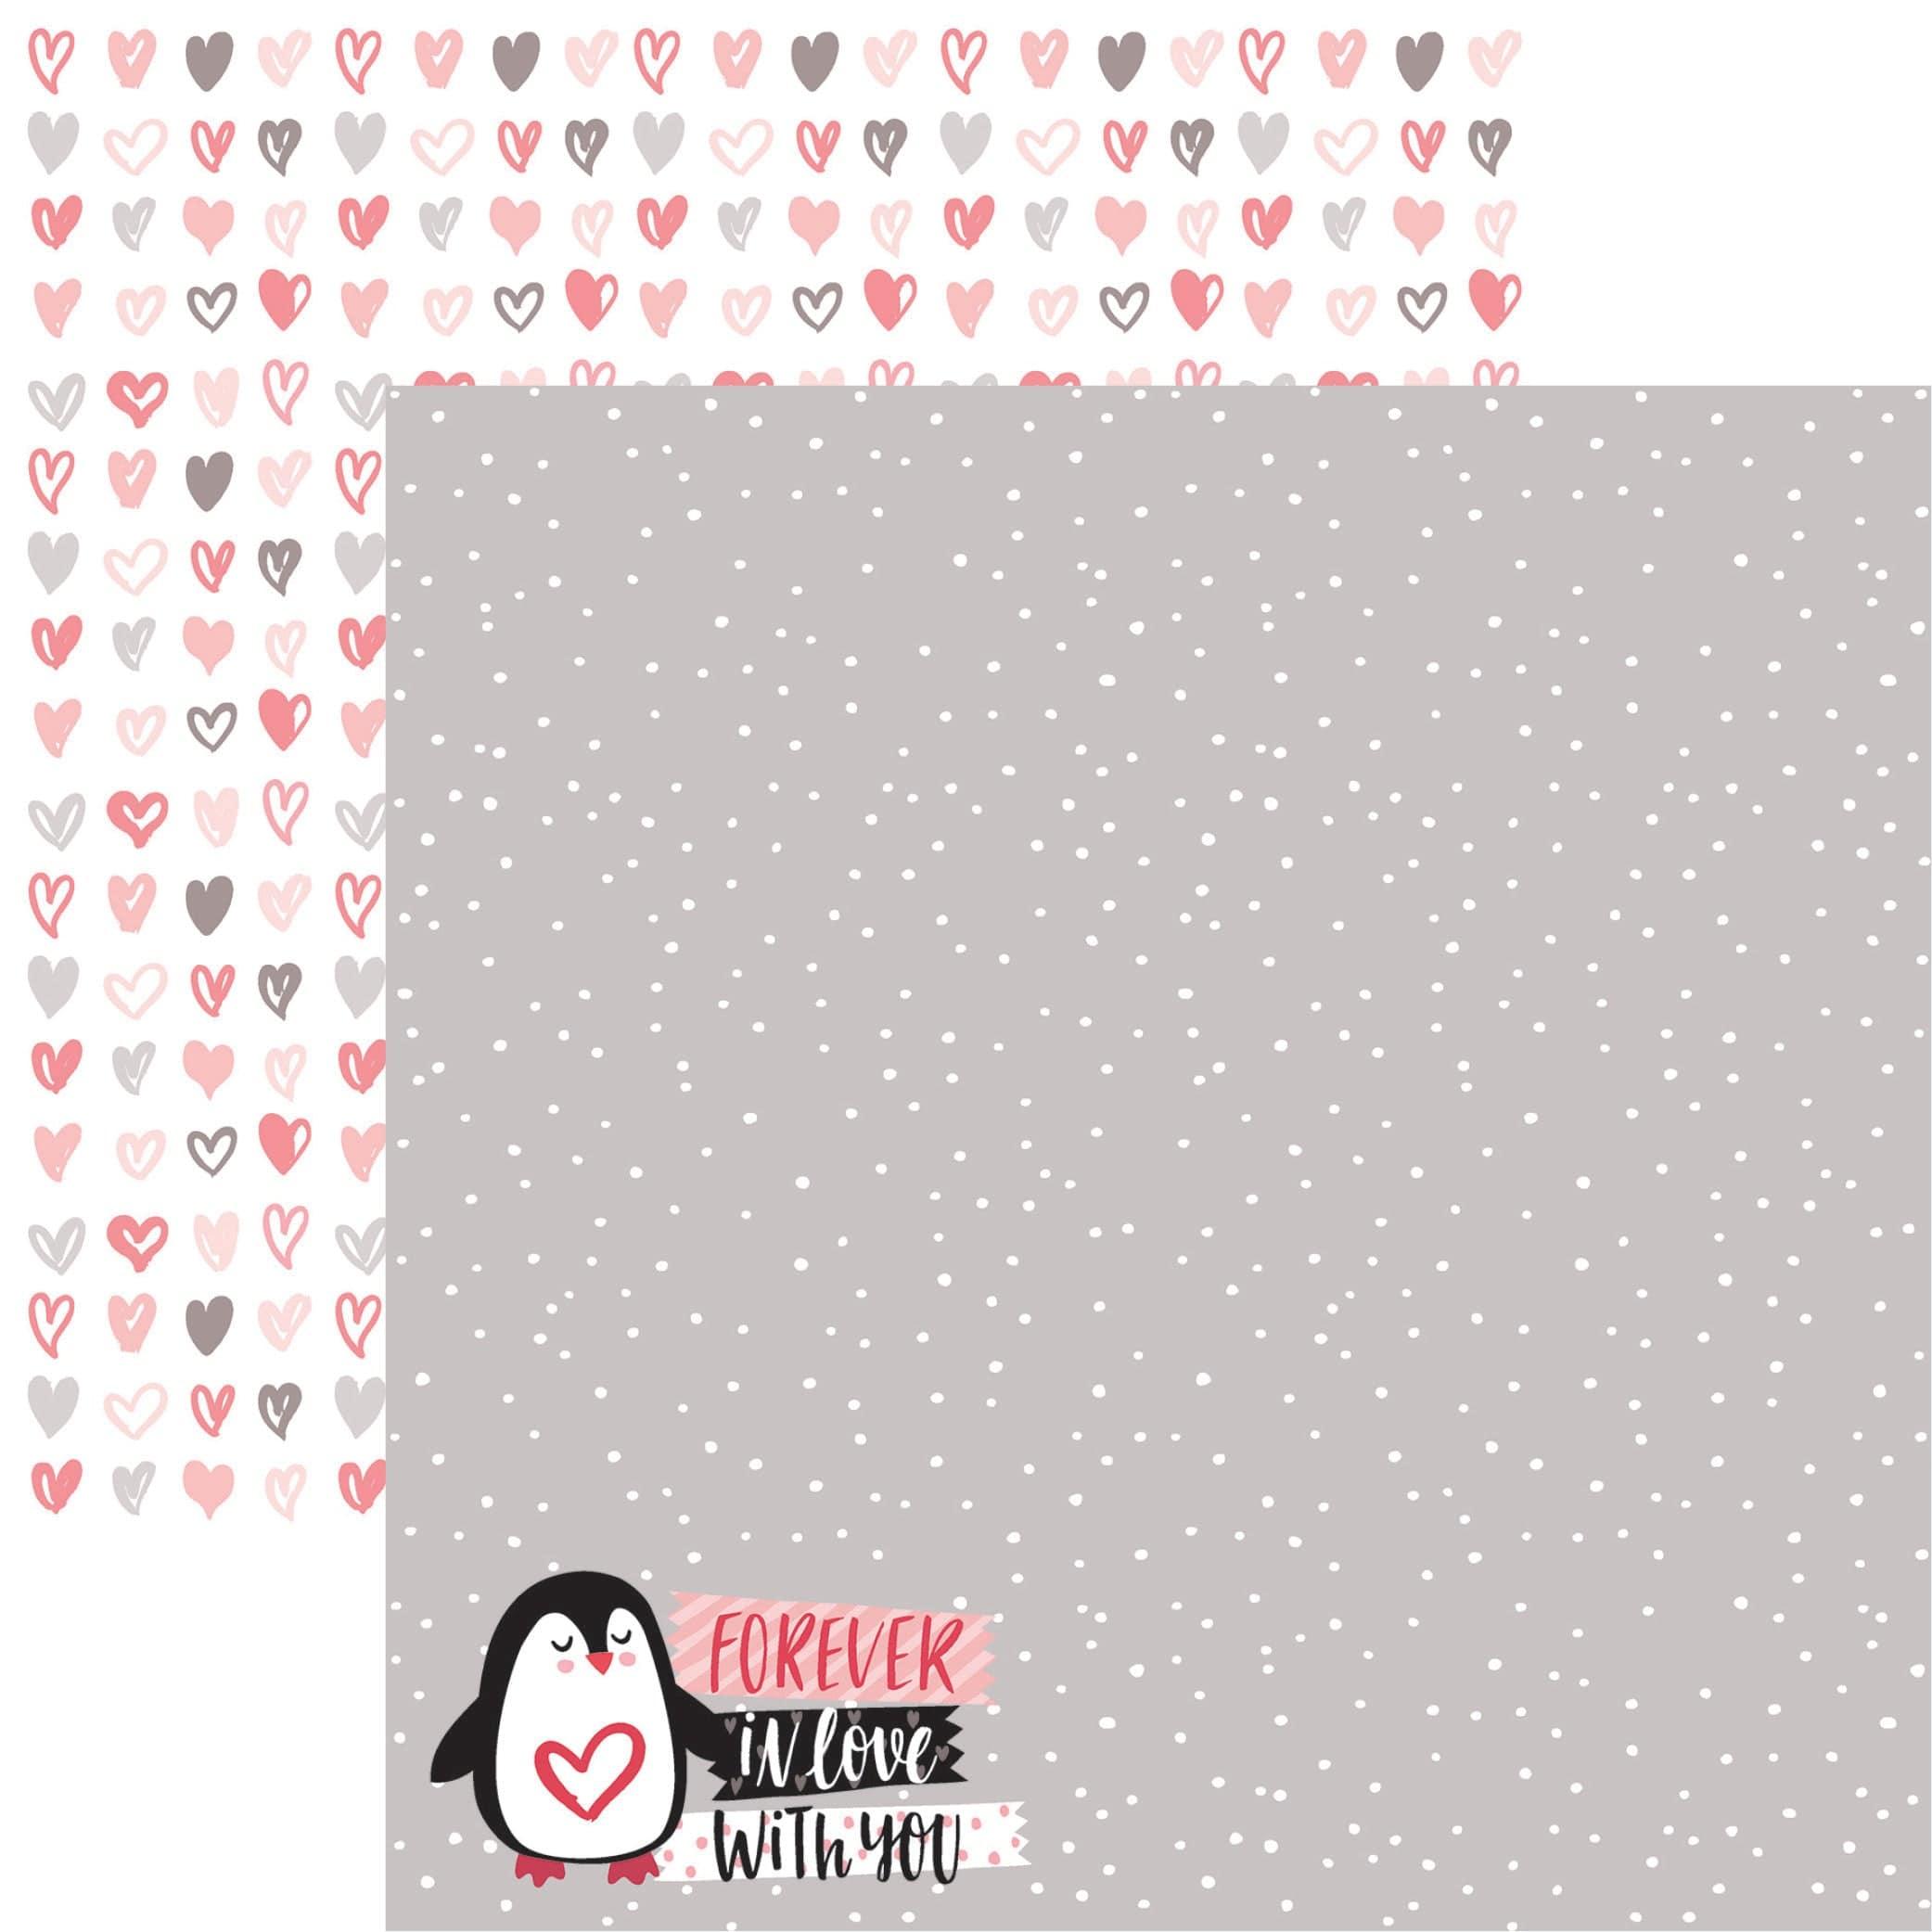 Forever In Love Collection Forever In Love 12 x 12 Double-Sided Scrapbook Paper by Reminisce - Scrapbook Supply Companies